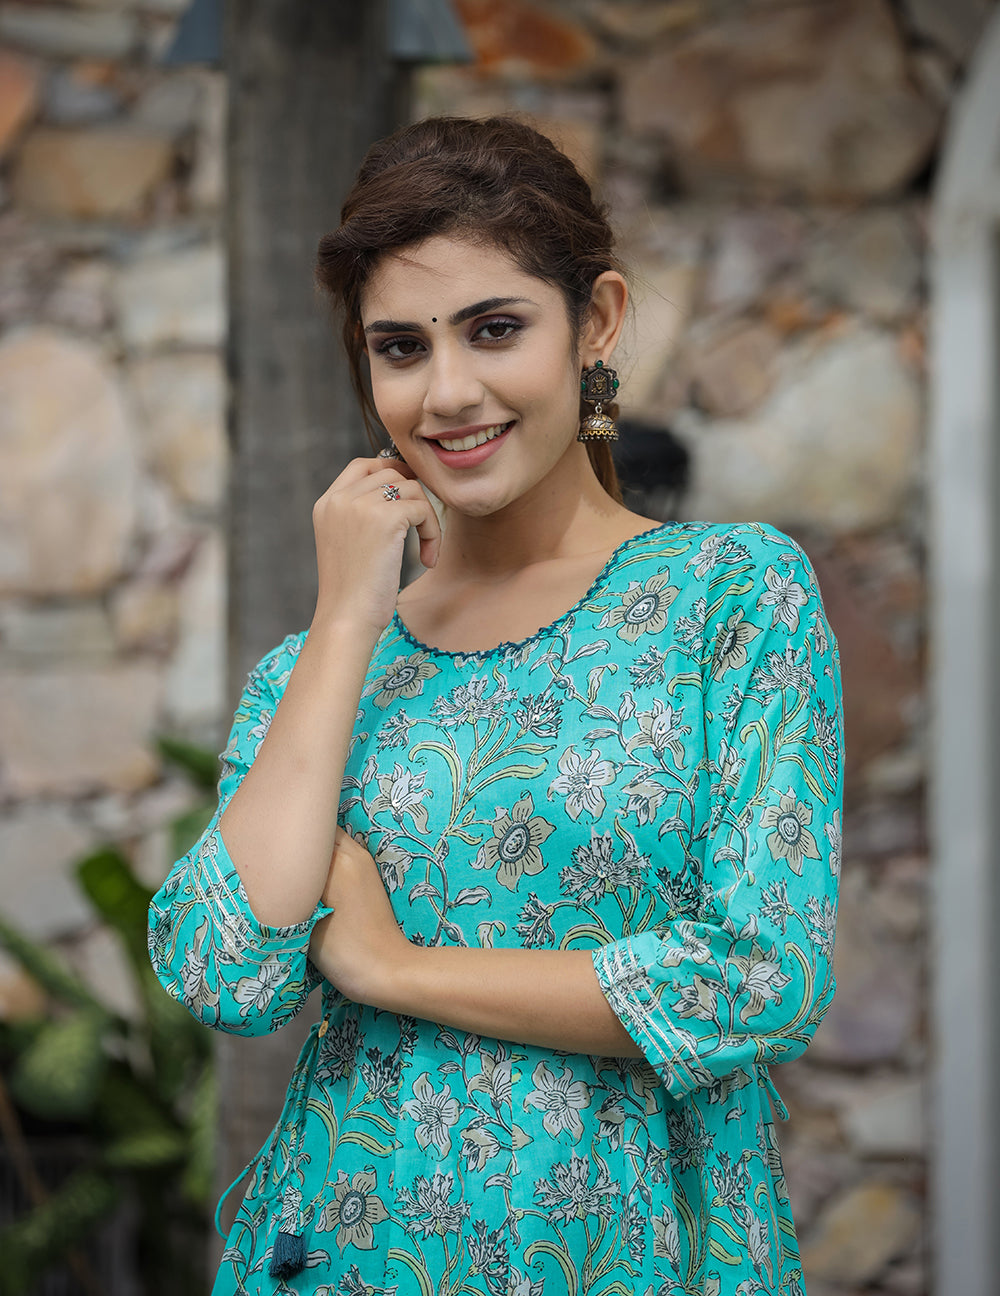 Sea Green Floral Printed Cotton Ethnic Dress (pack of 1)